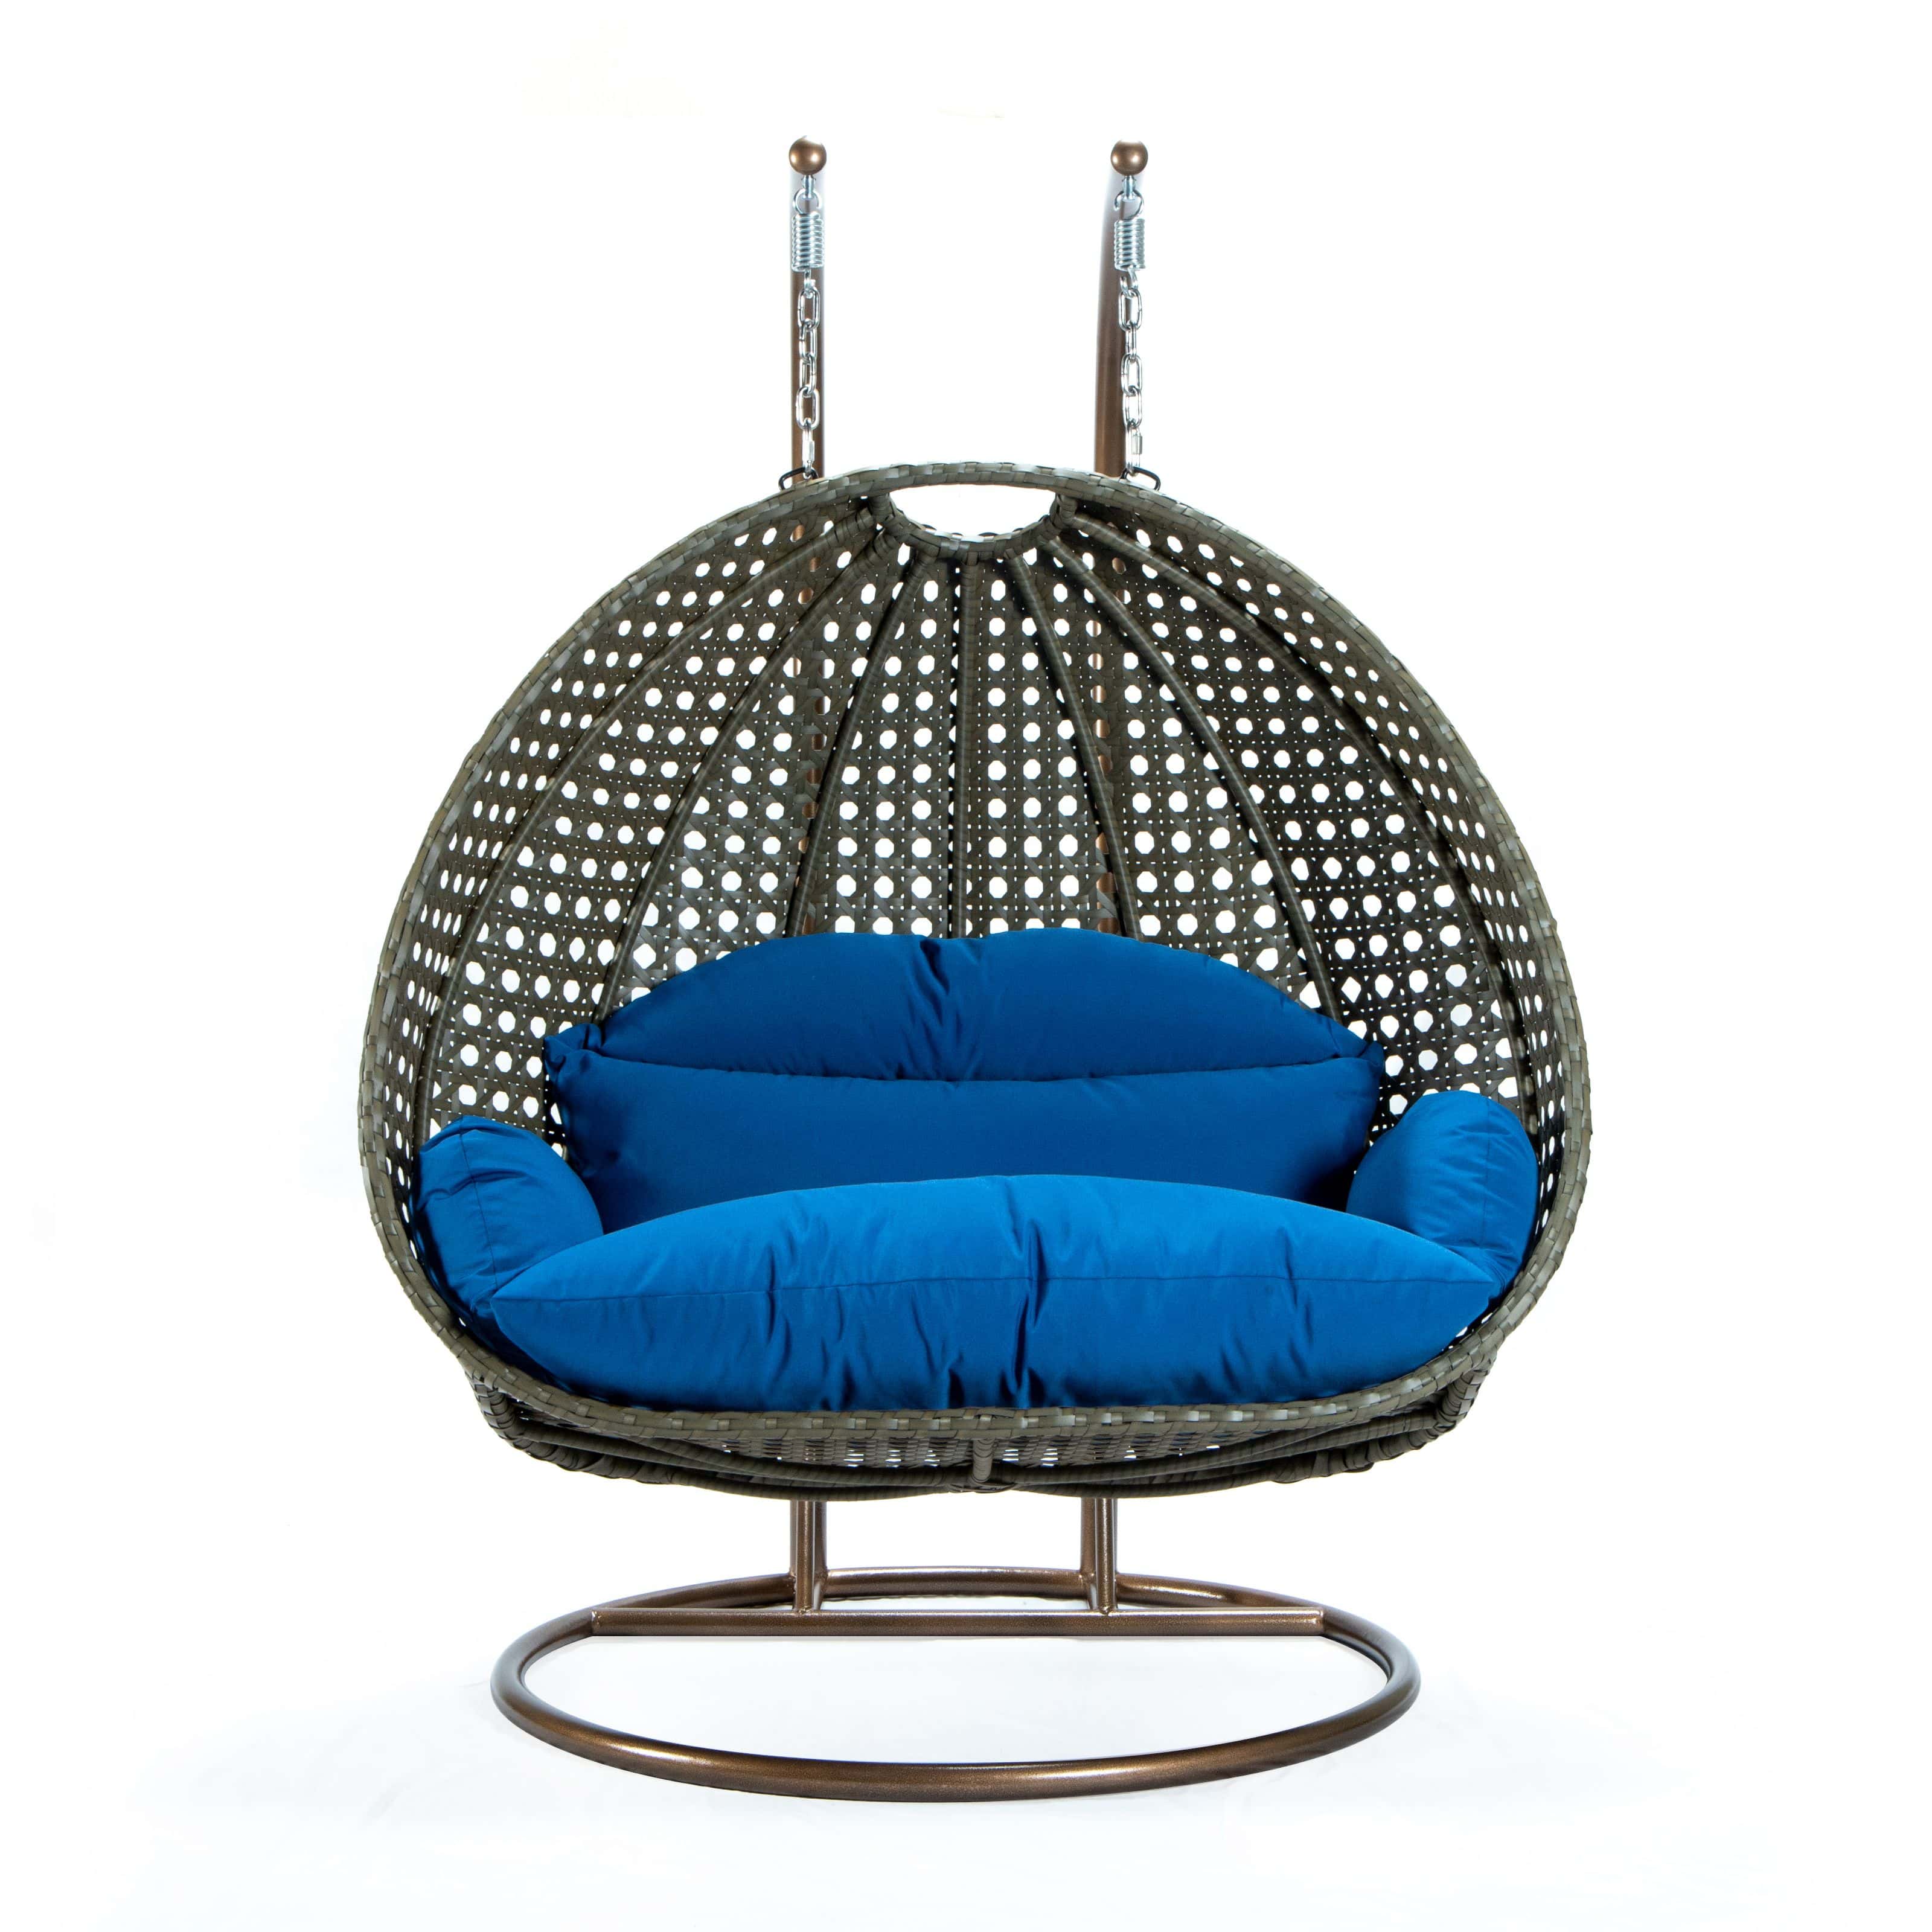  Egg Chair Swing Bm for Large Space